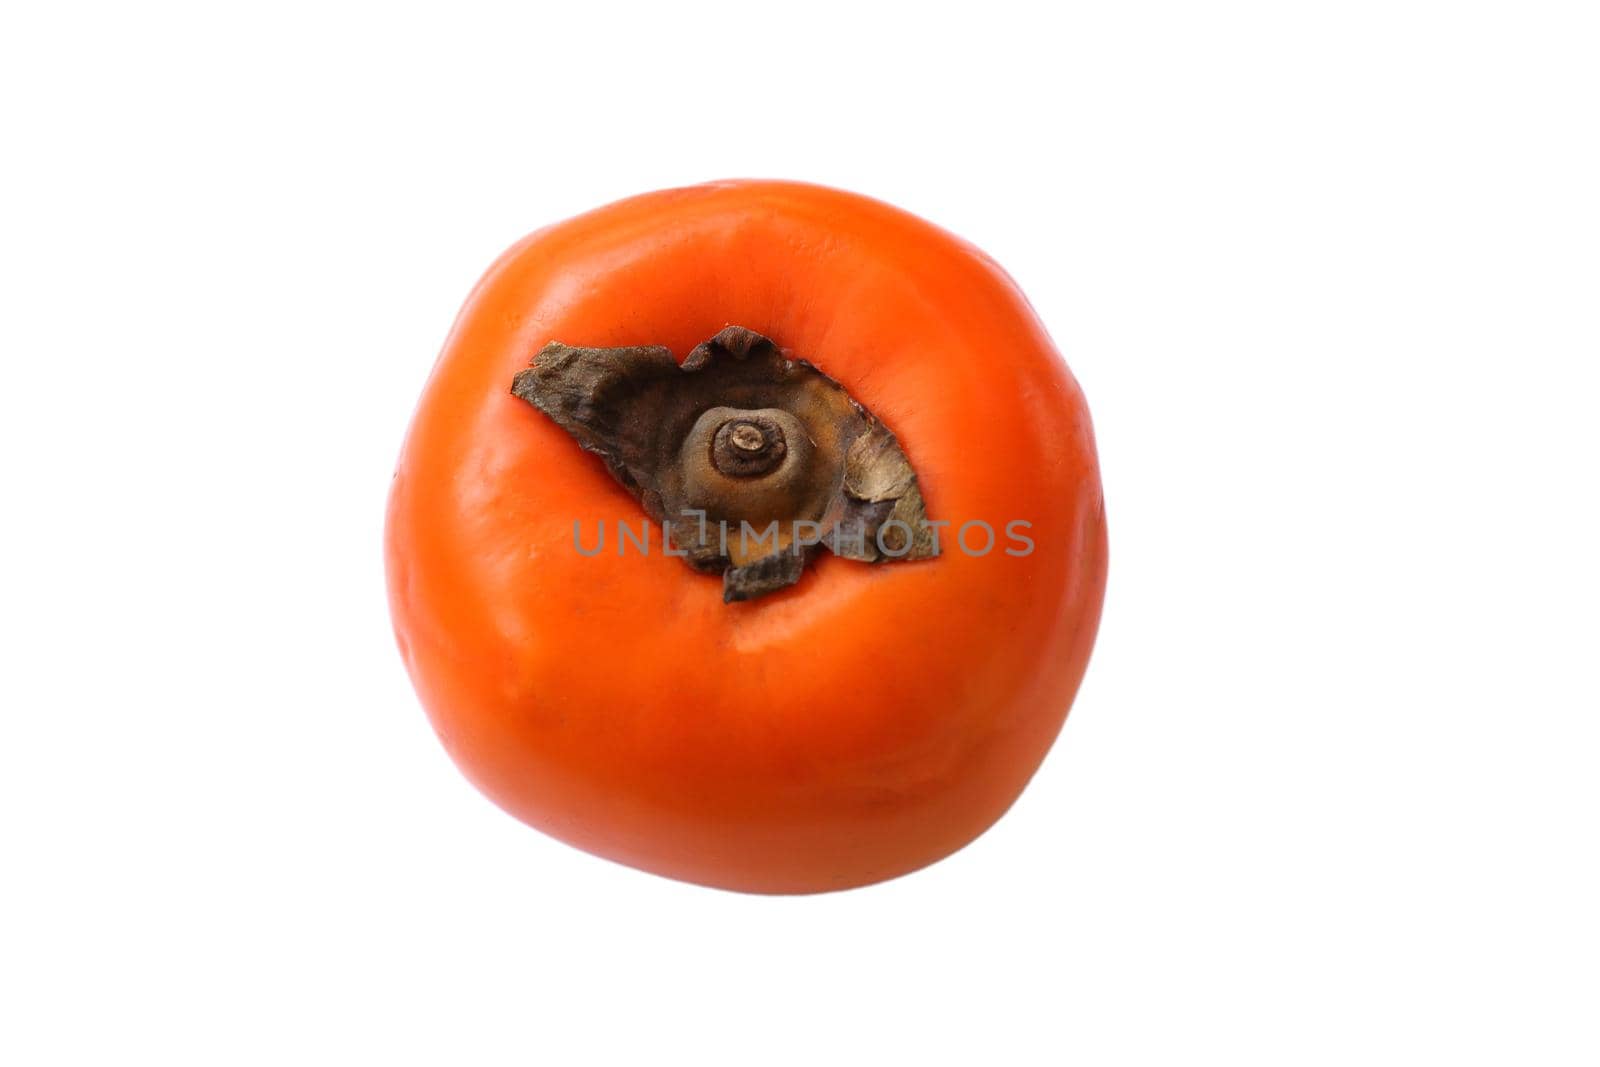 Ripe persimmon isolated on a white background. The polarity of the fruit is brown. by pichai25